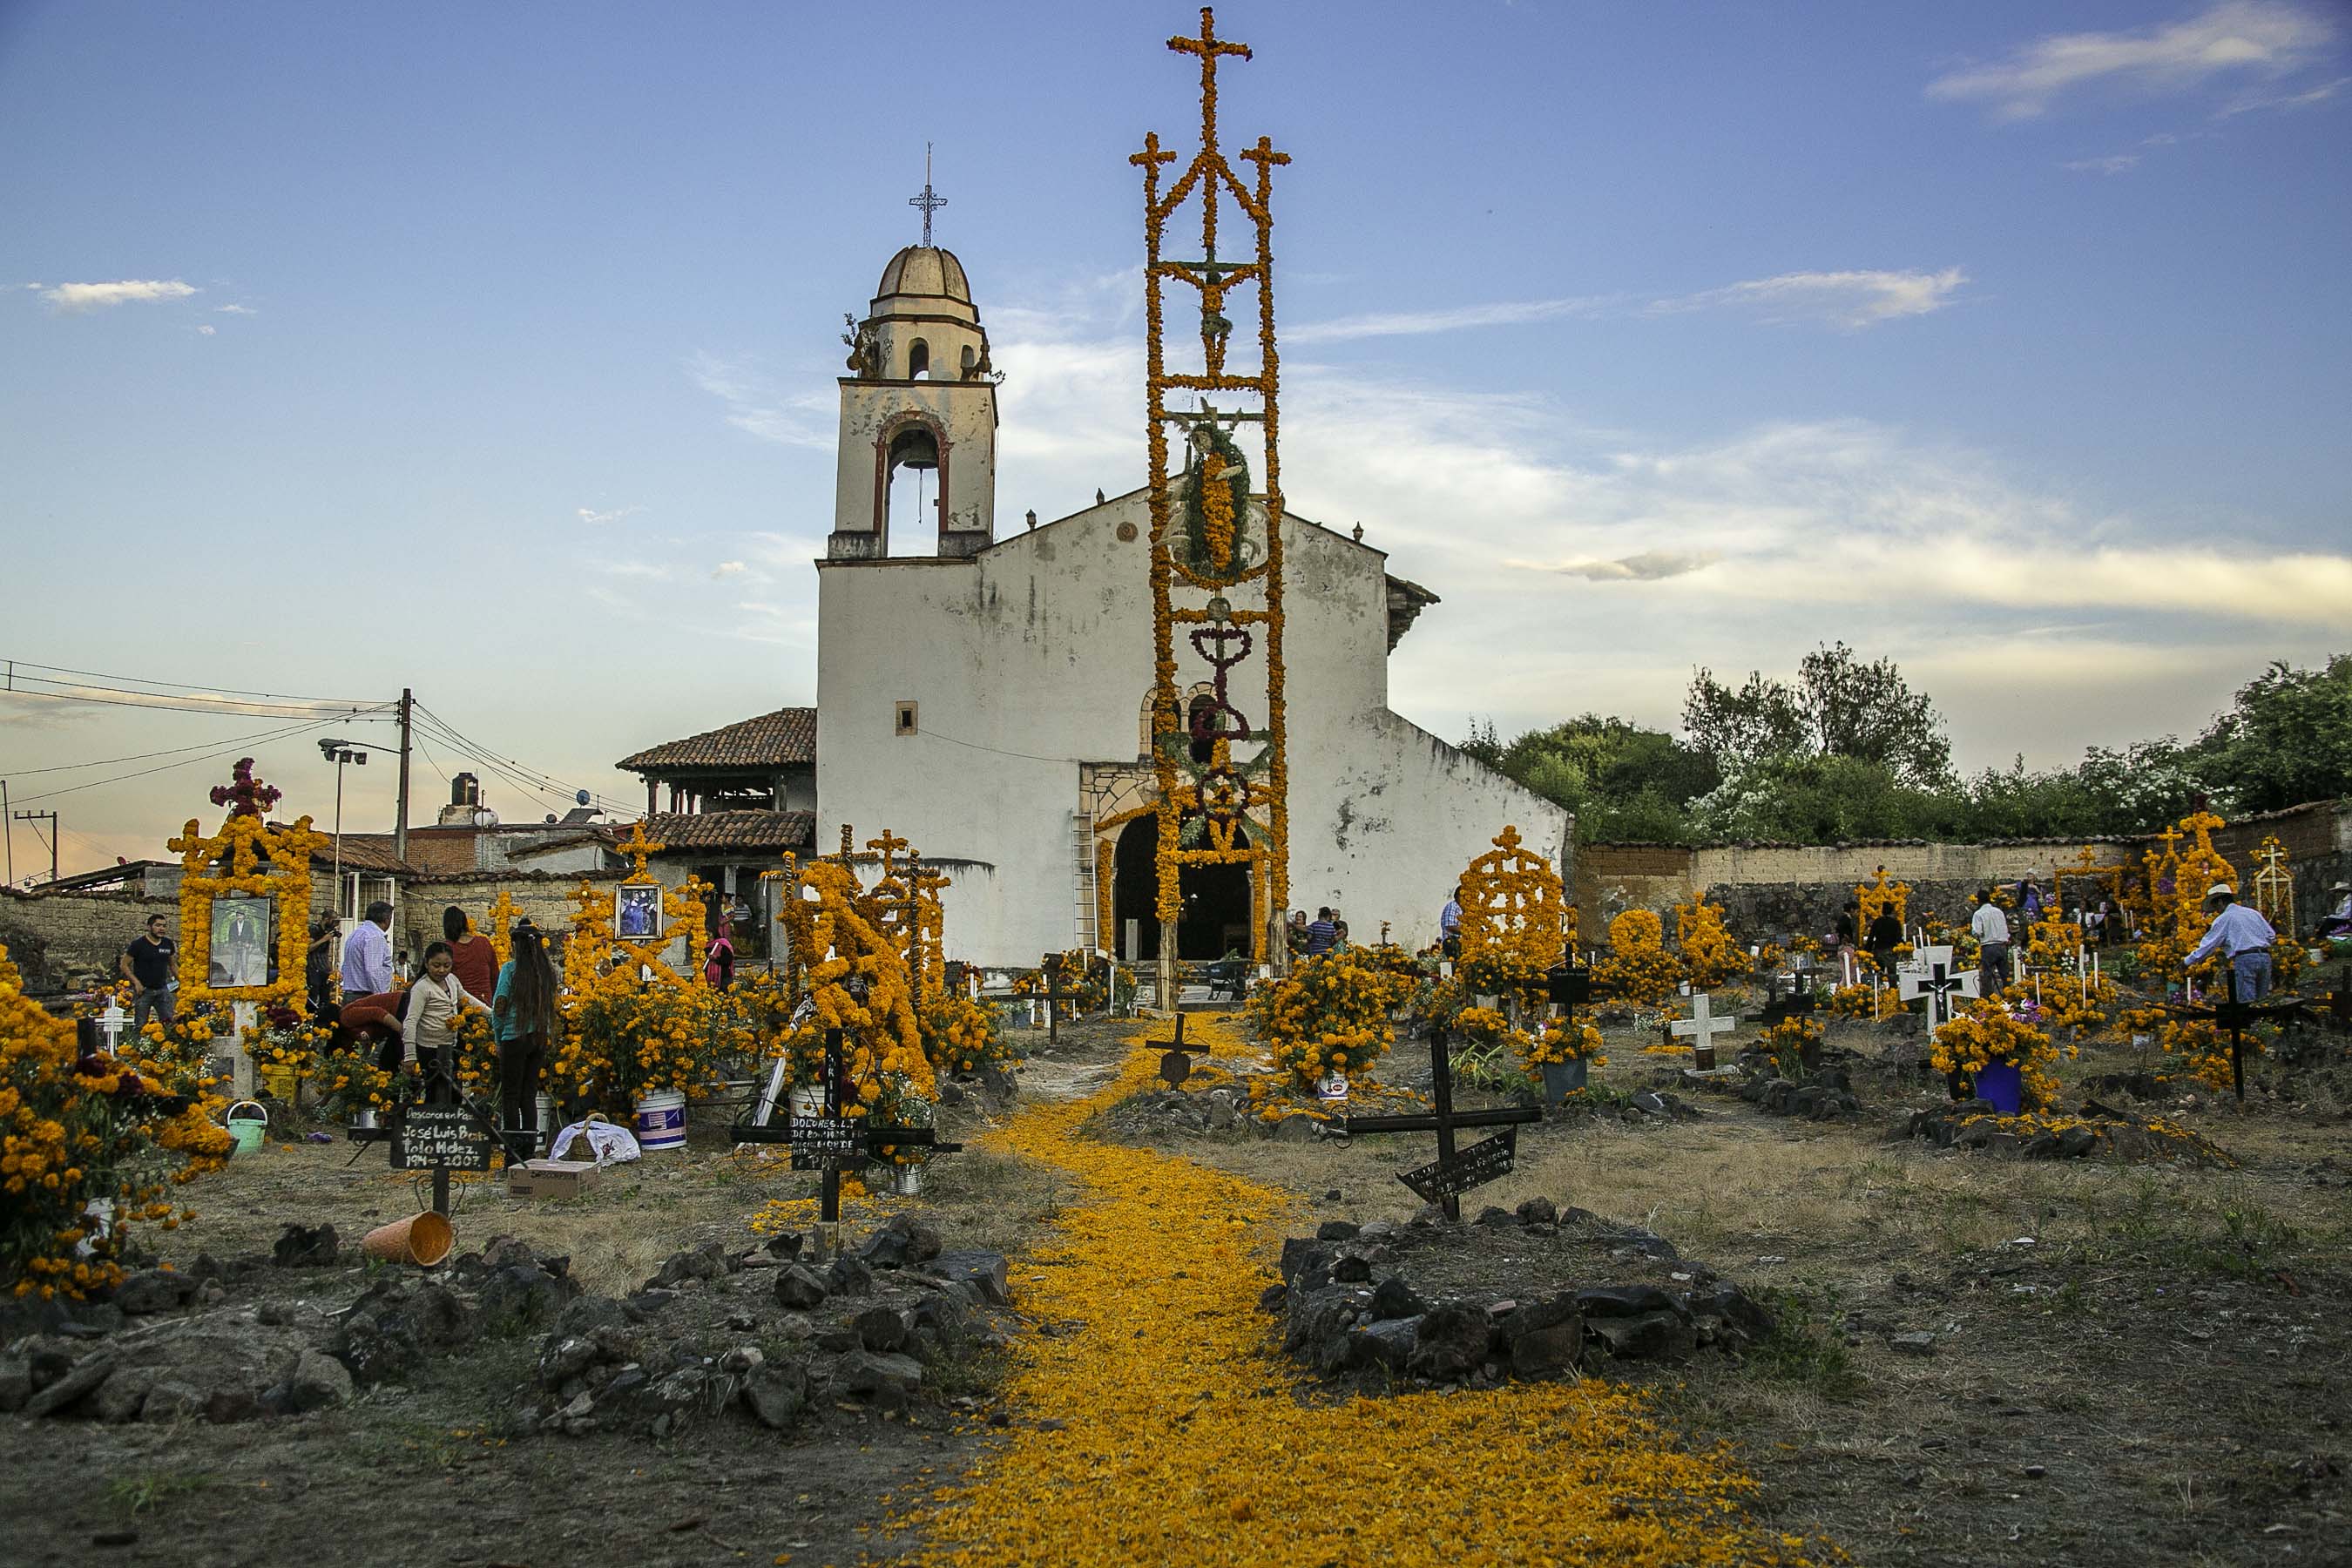 A bed of Cempazuchitl flowers pave the way to a small graveyard where families prepare for the "Dia de los Muertos" festivities, a celebration of the lives of past ancestors. The flower is a symbol of fire and the sun, it is believed to serve as guidance for the returning souls.